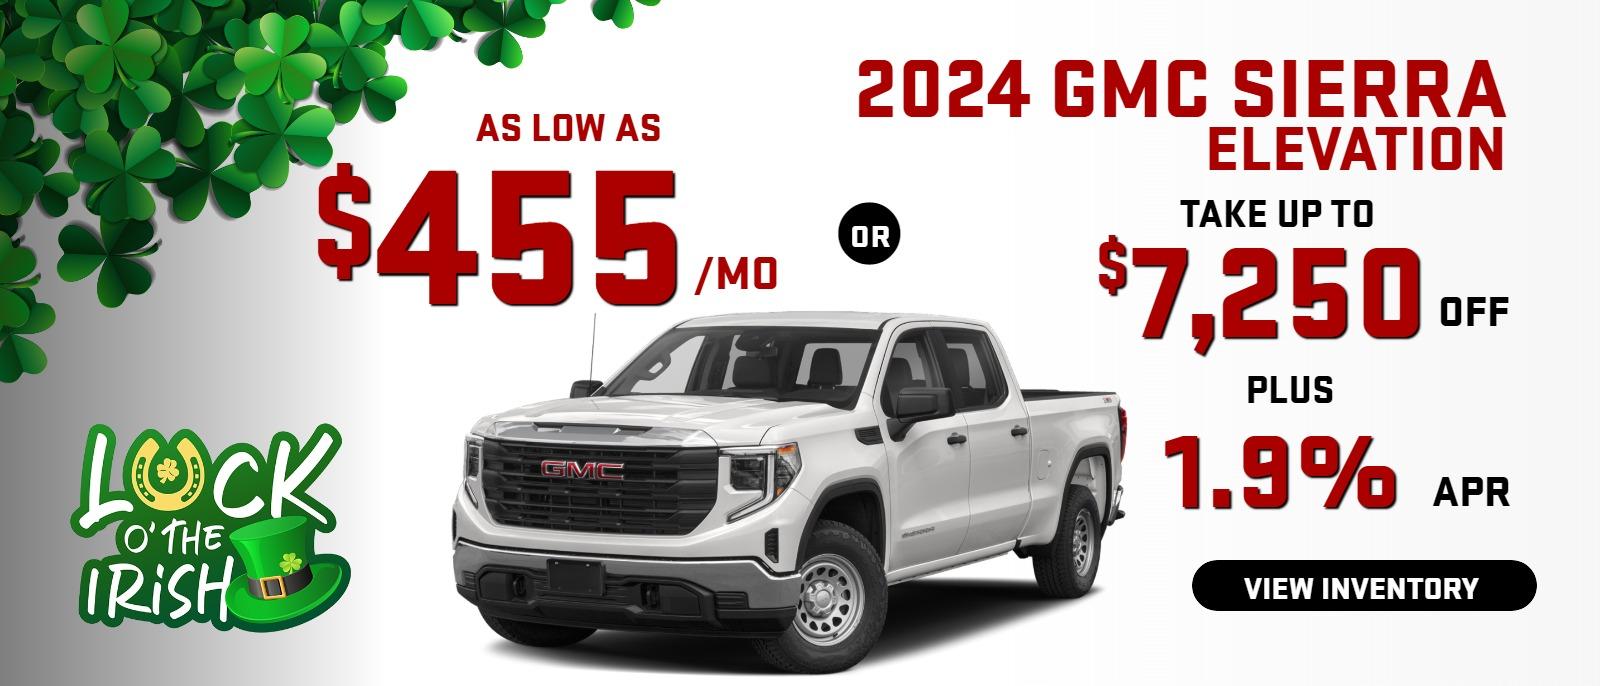 2024 GMC Sierra Elevation
Stock G2404

AS LOW AS $455/mo
OR
take up to $7250 OFF
PLUS 
1.9 % finance